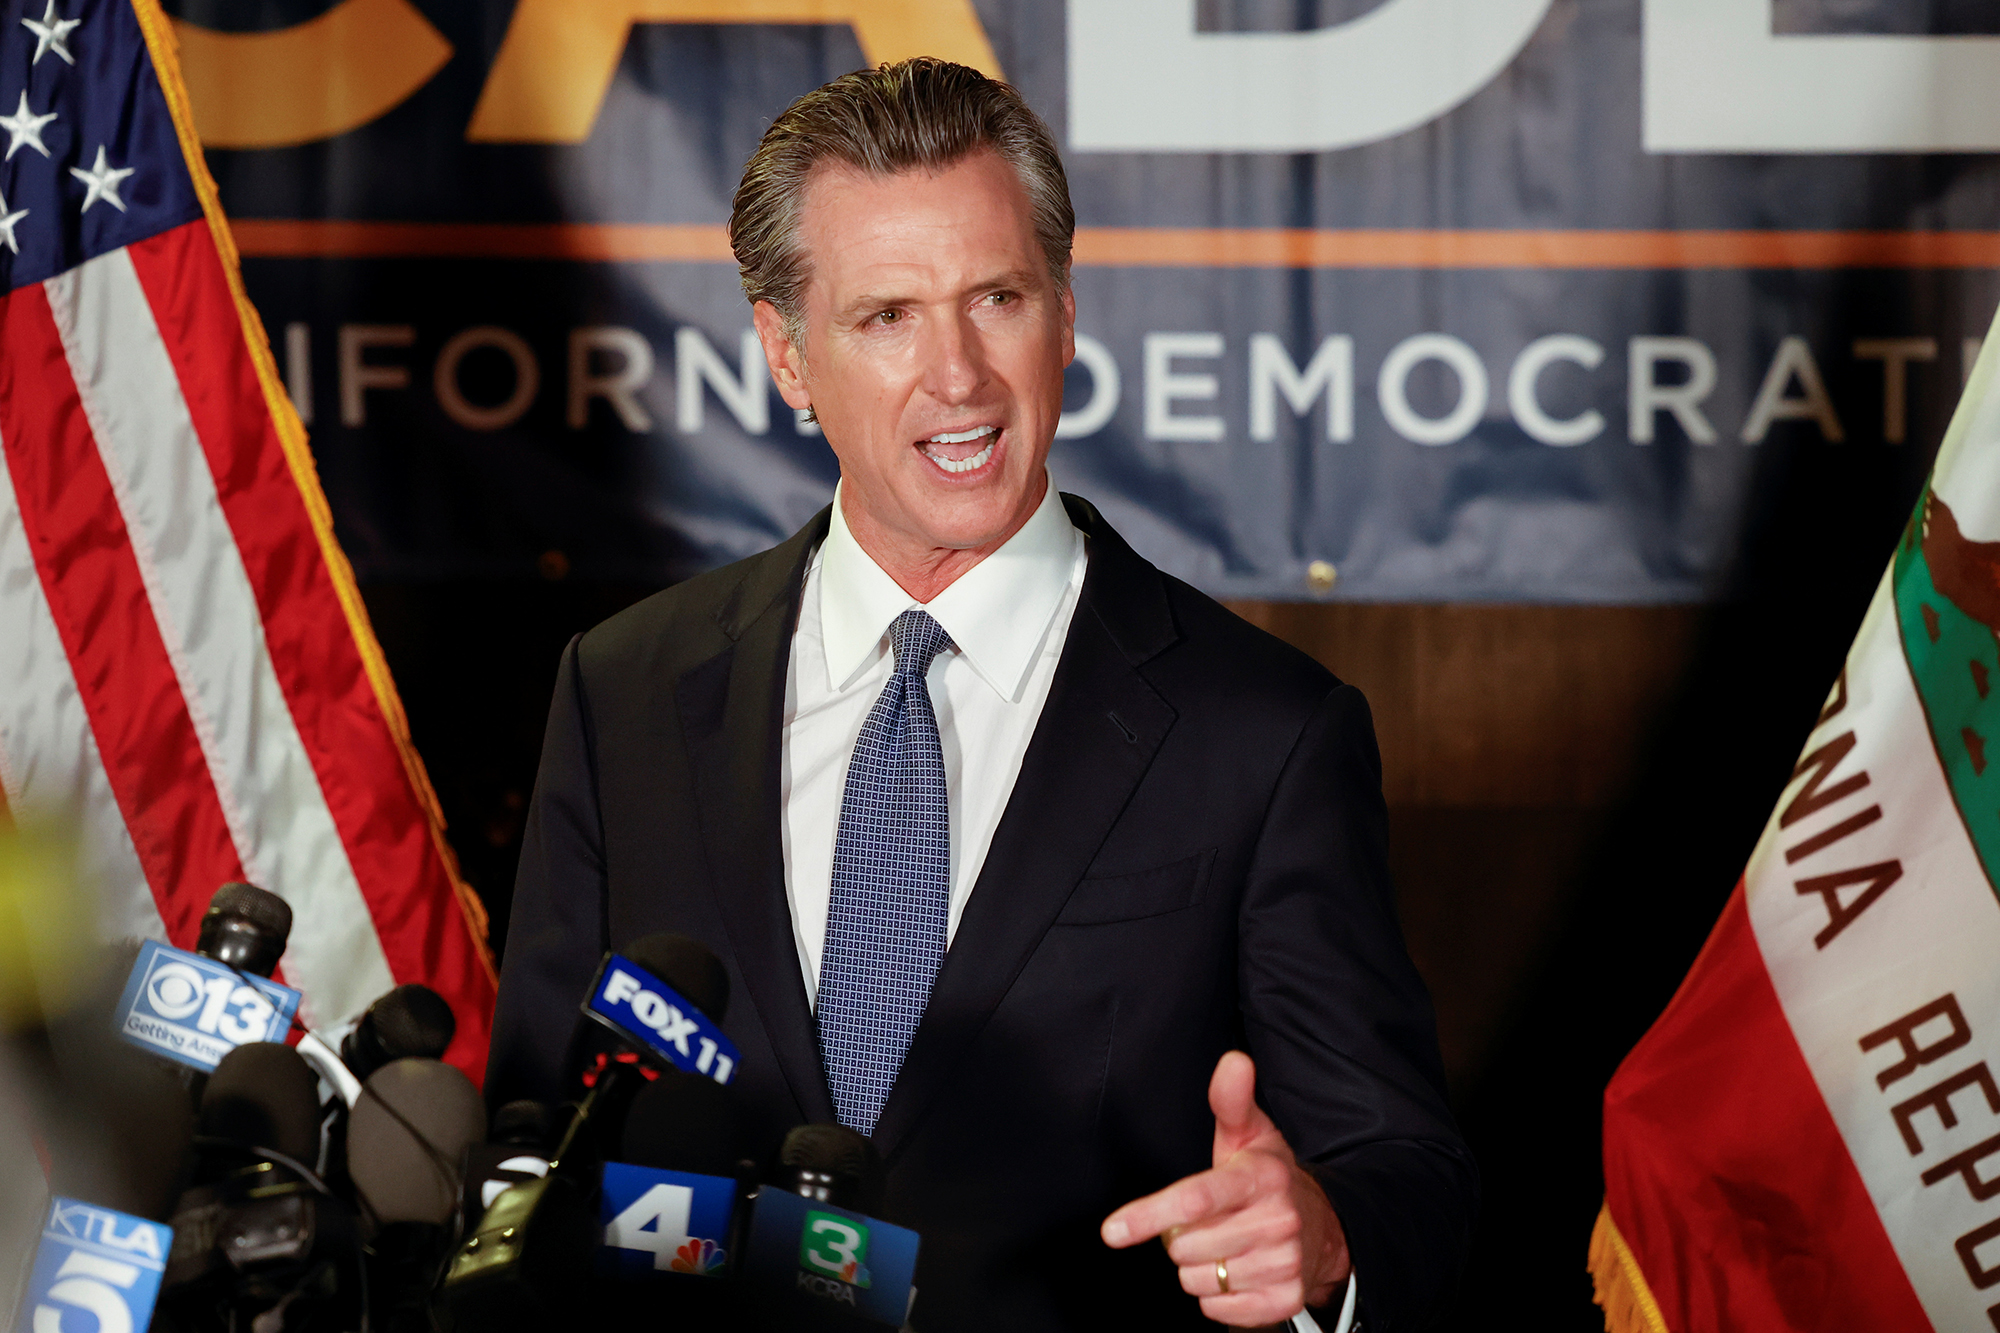 California Governor Gavin Newsom makes an appearance after the polls close on the recall election, at the California Democratic Party headquarters in Sacramento, California, U.S., September 14, 2021.